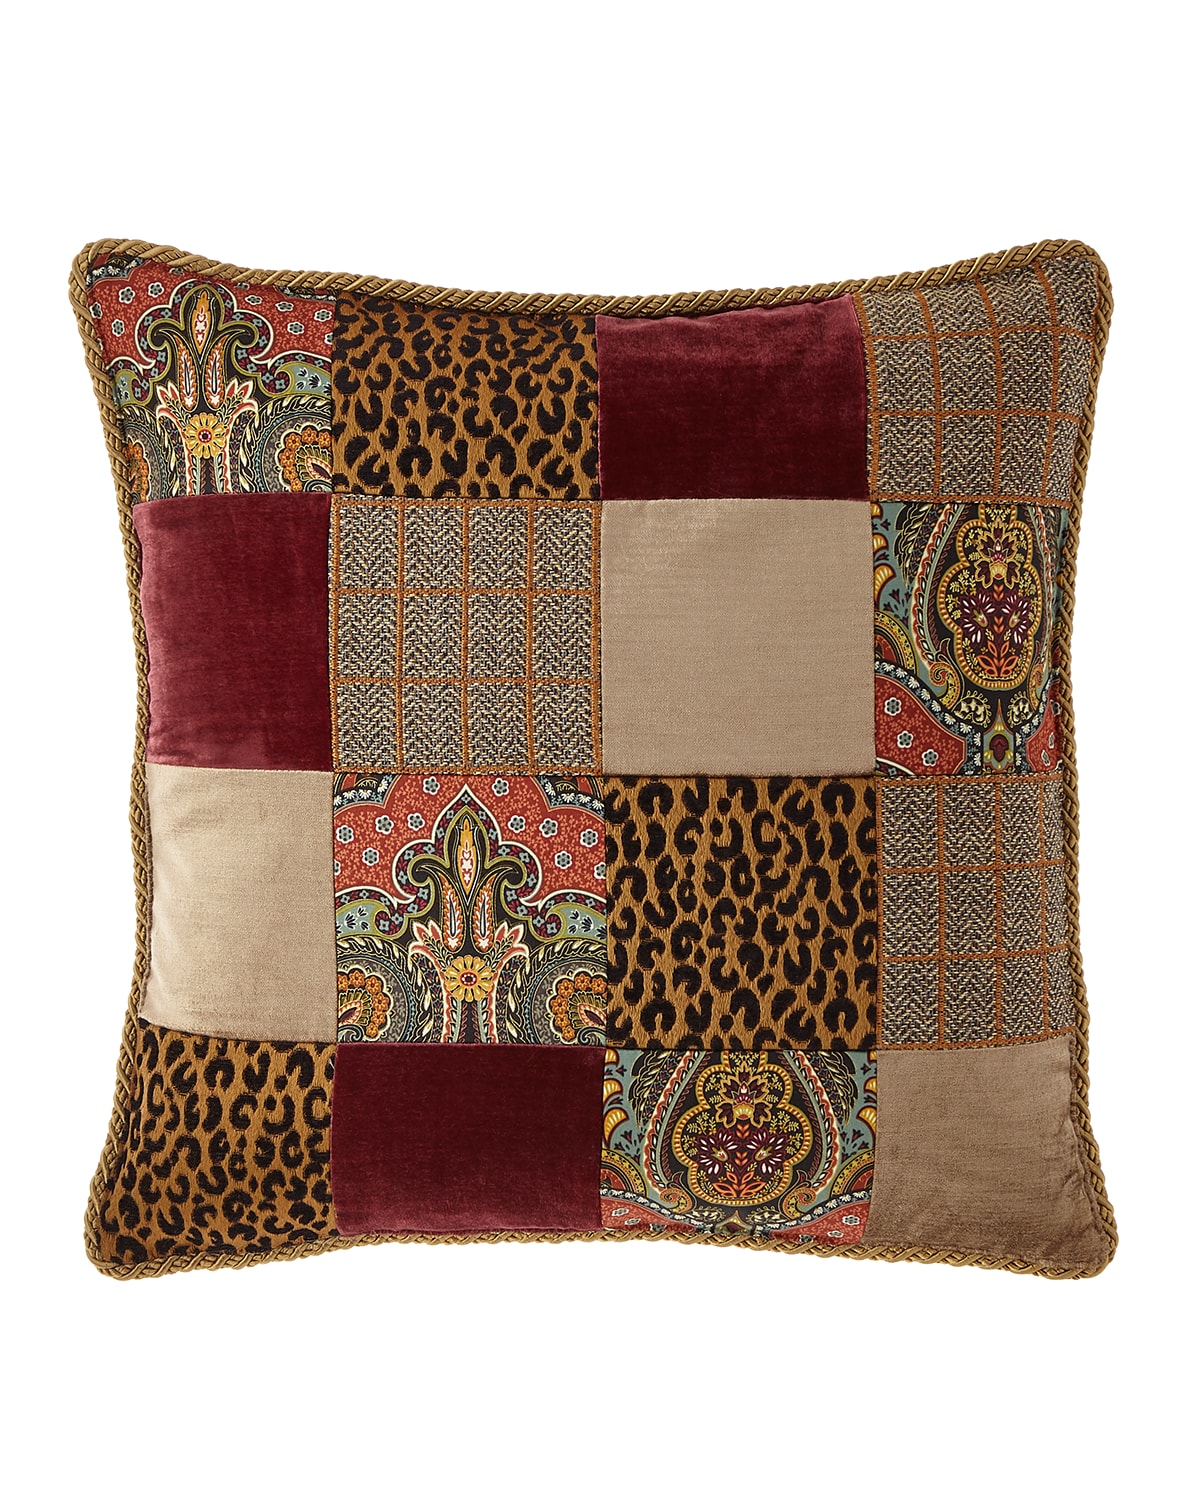 Image Sweet Dreams Spencer Square Patchwork Pillow